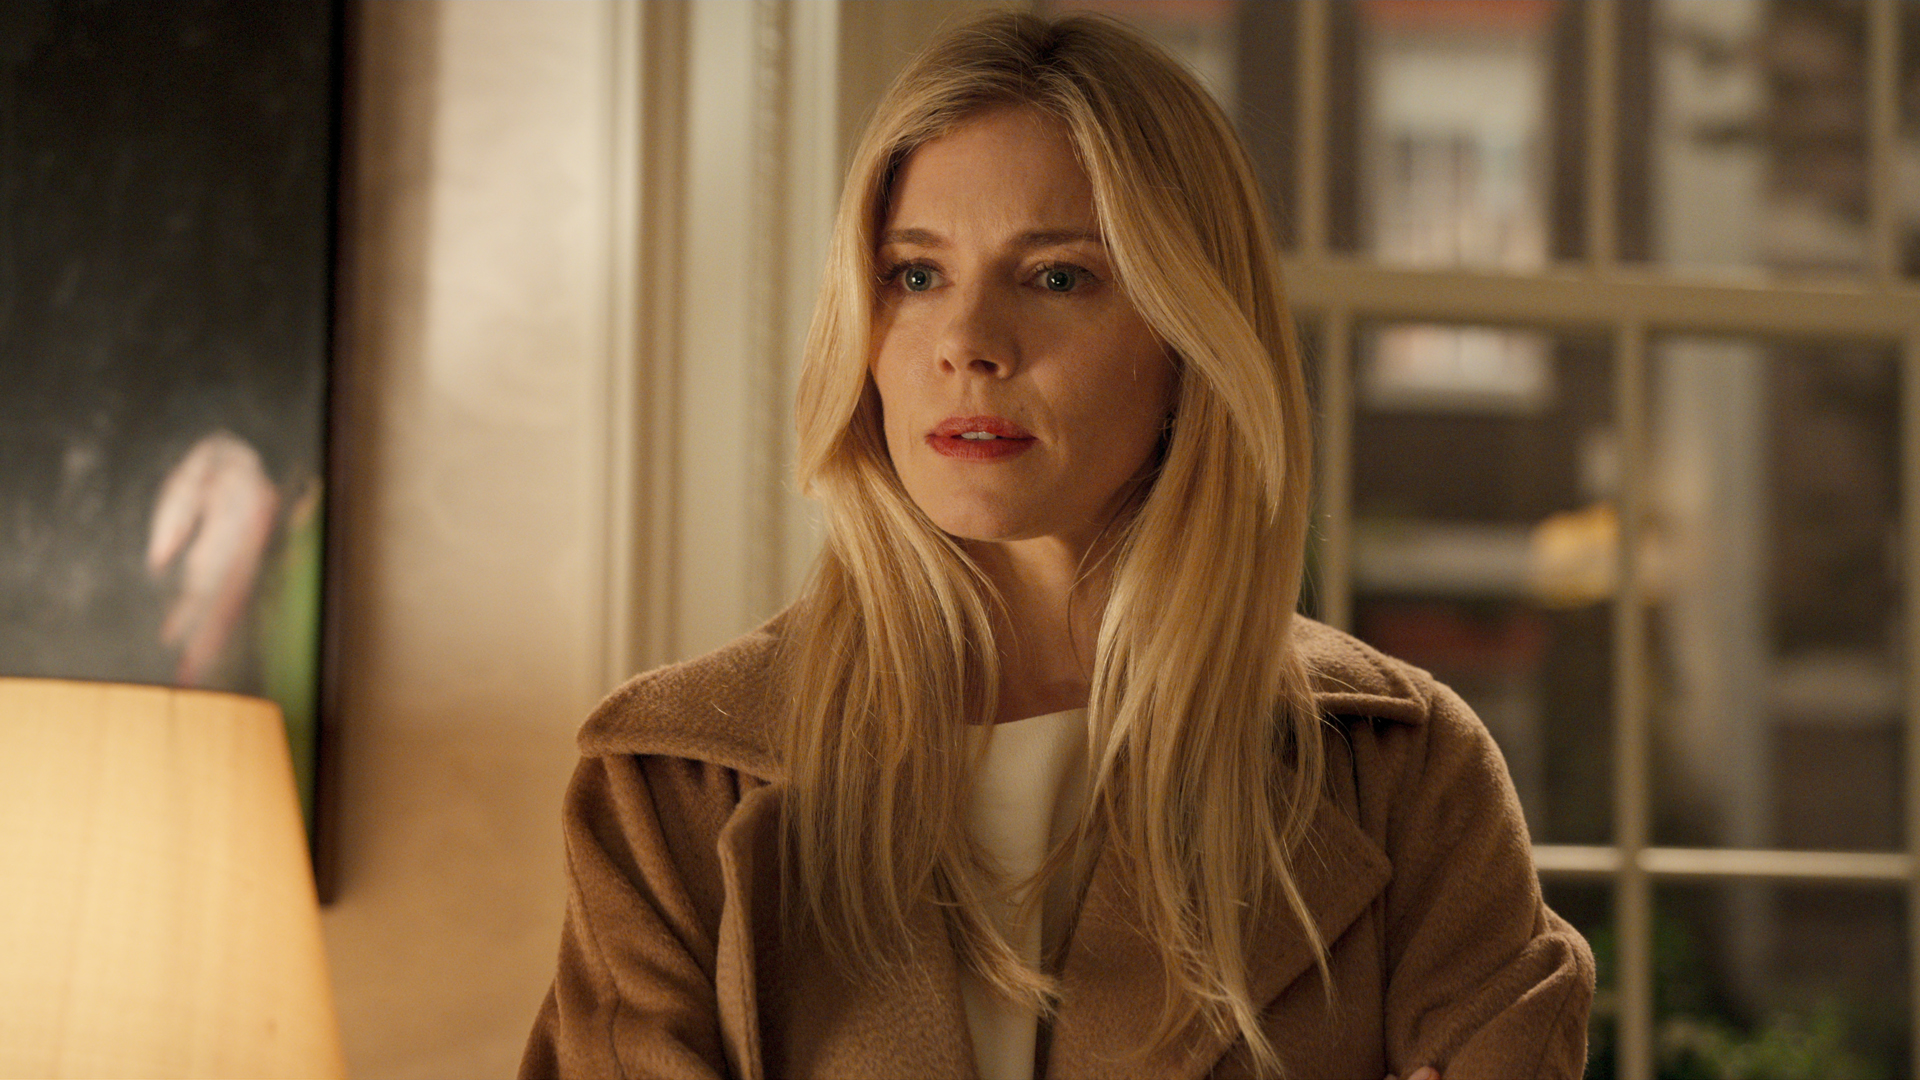 Sienna Miller plays Sophie Whitehouse in Anatomy of a Scandal Photo: Netflix